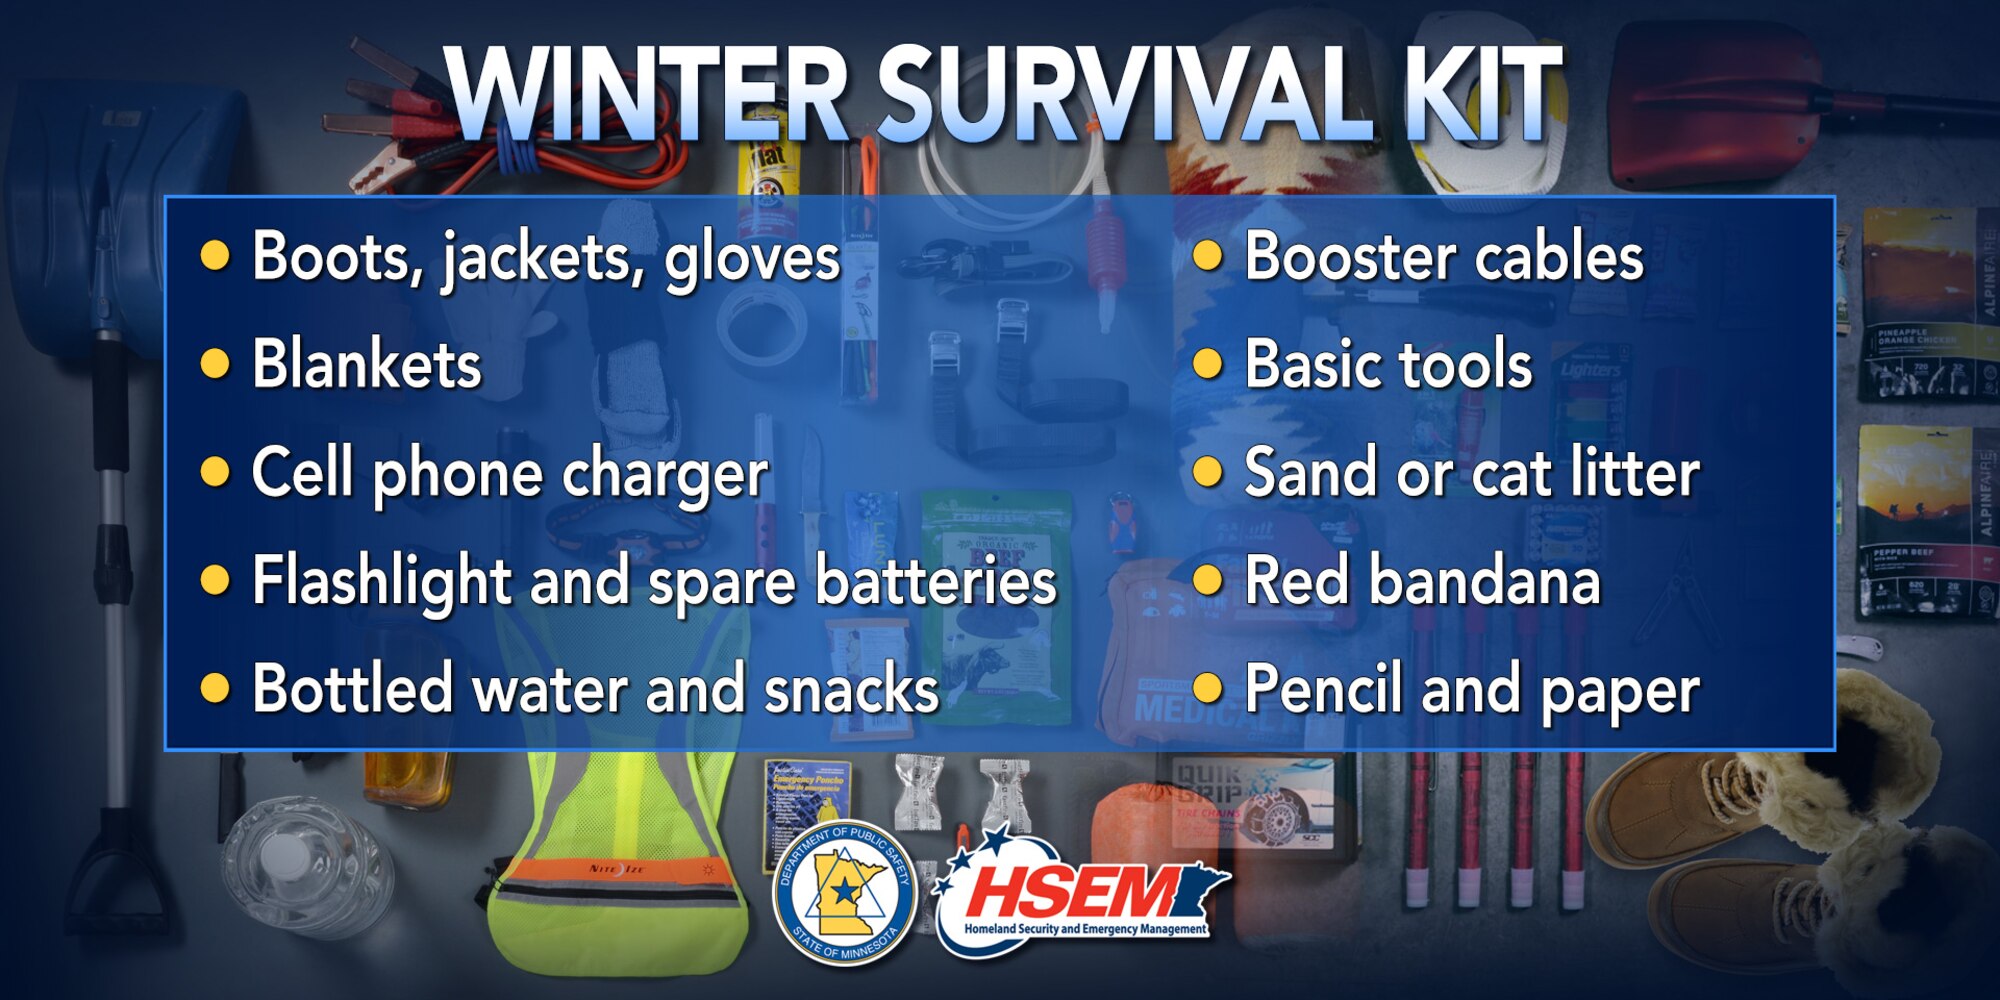 Helpful hints for an effective winter survival kit.